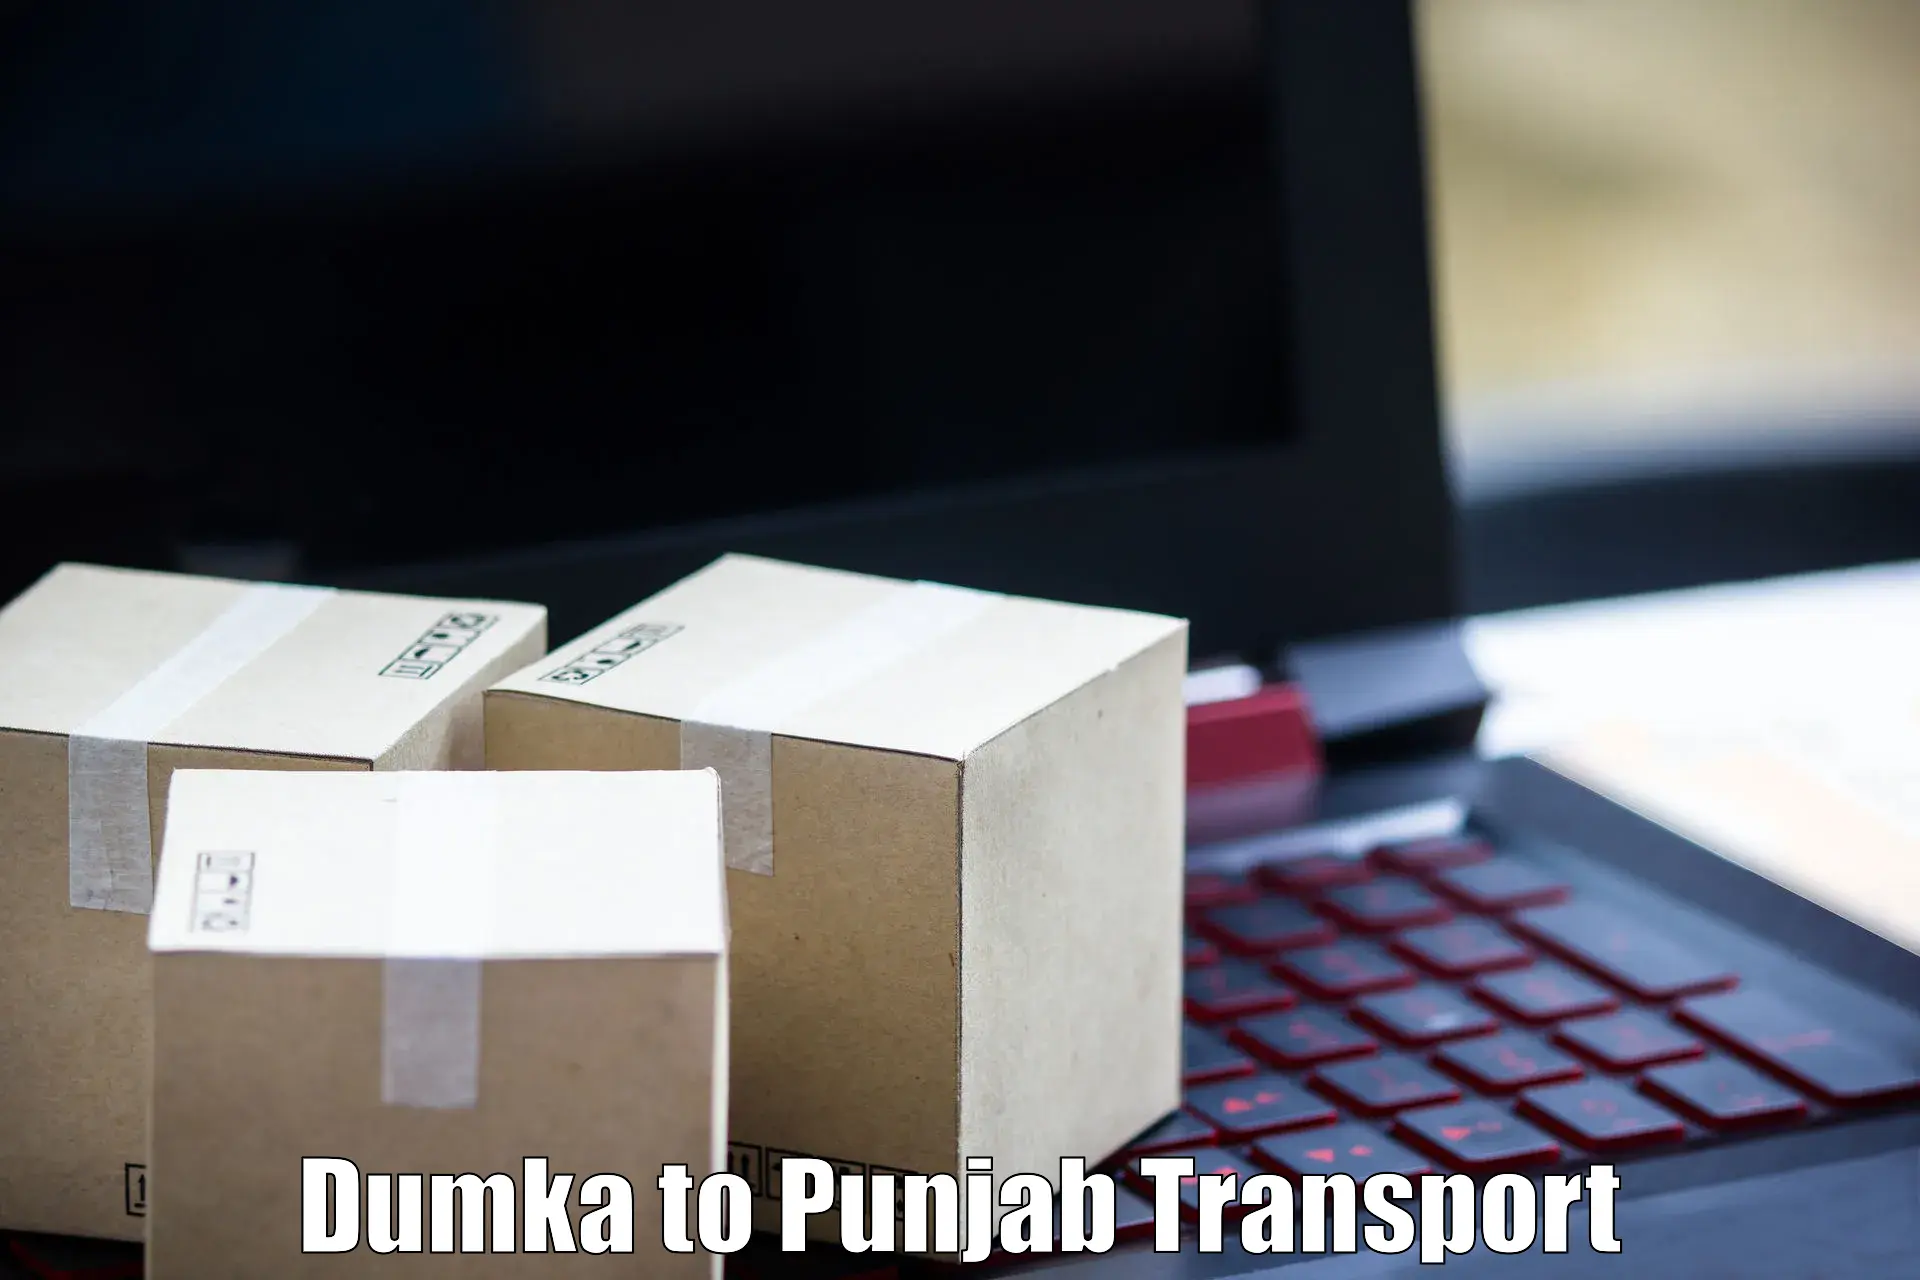 Express transport services in Dumka to Pathankot